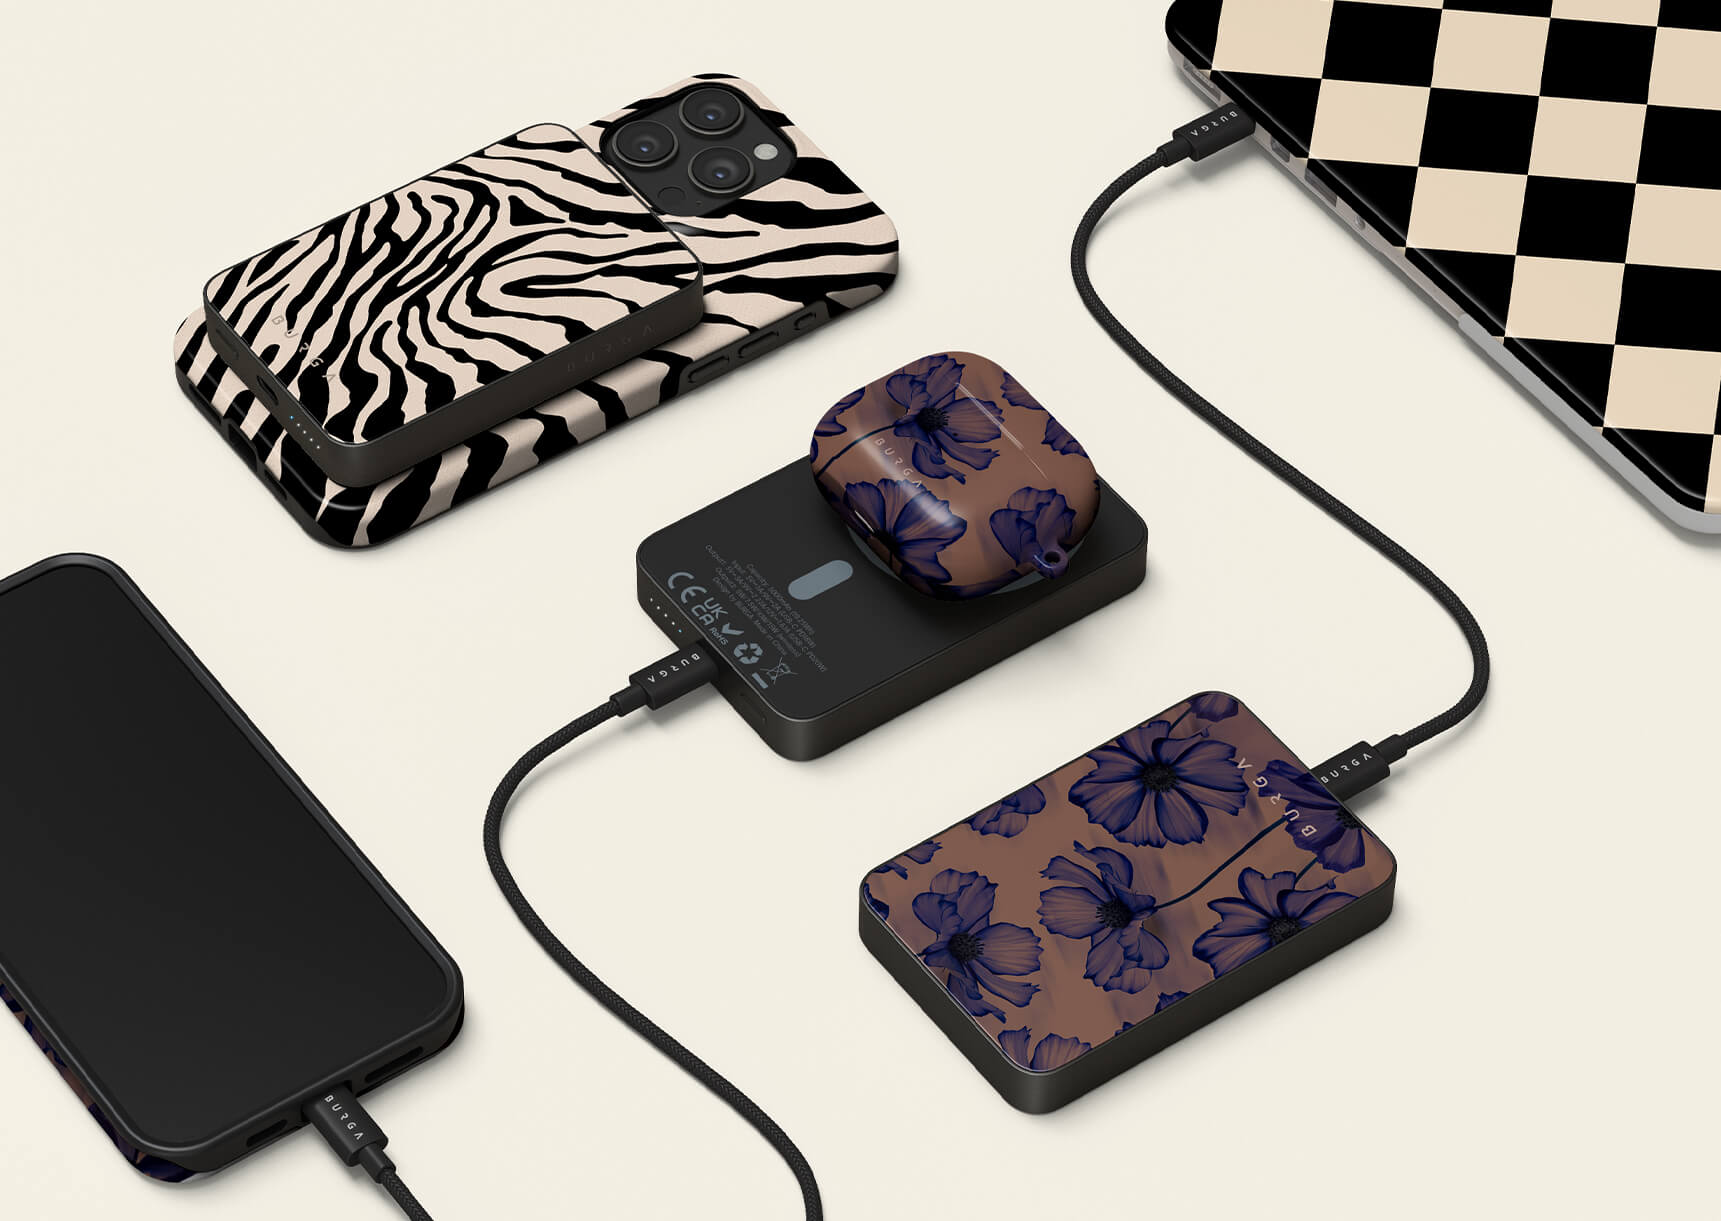 Assorted patterned tech accessories, including phone cases and chargers, connected and displayed on a light background.